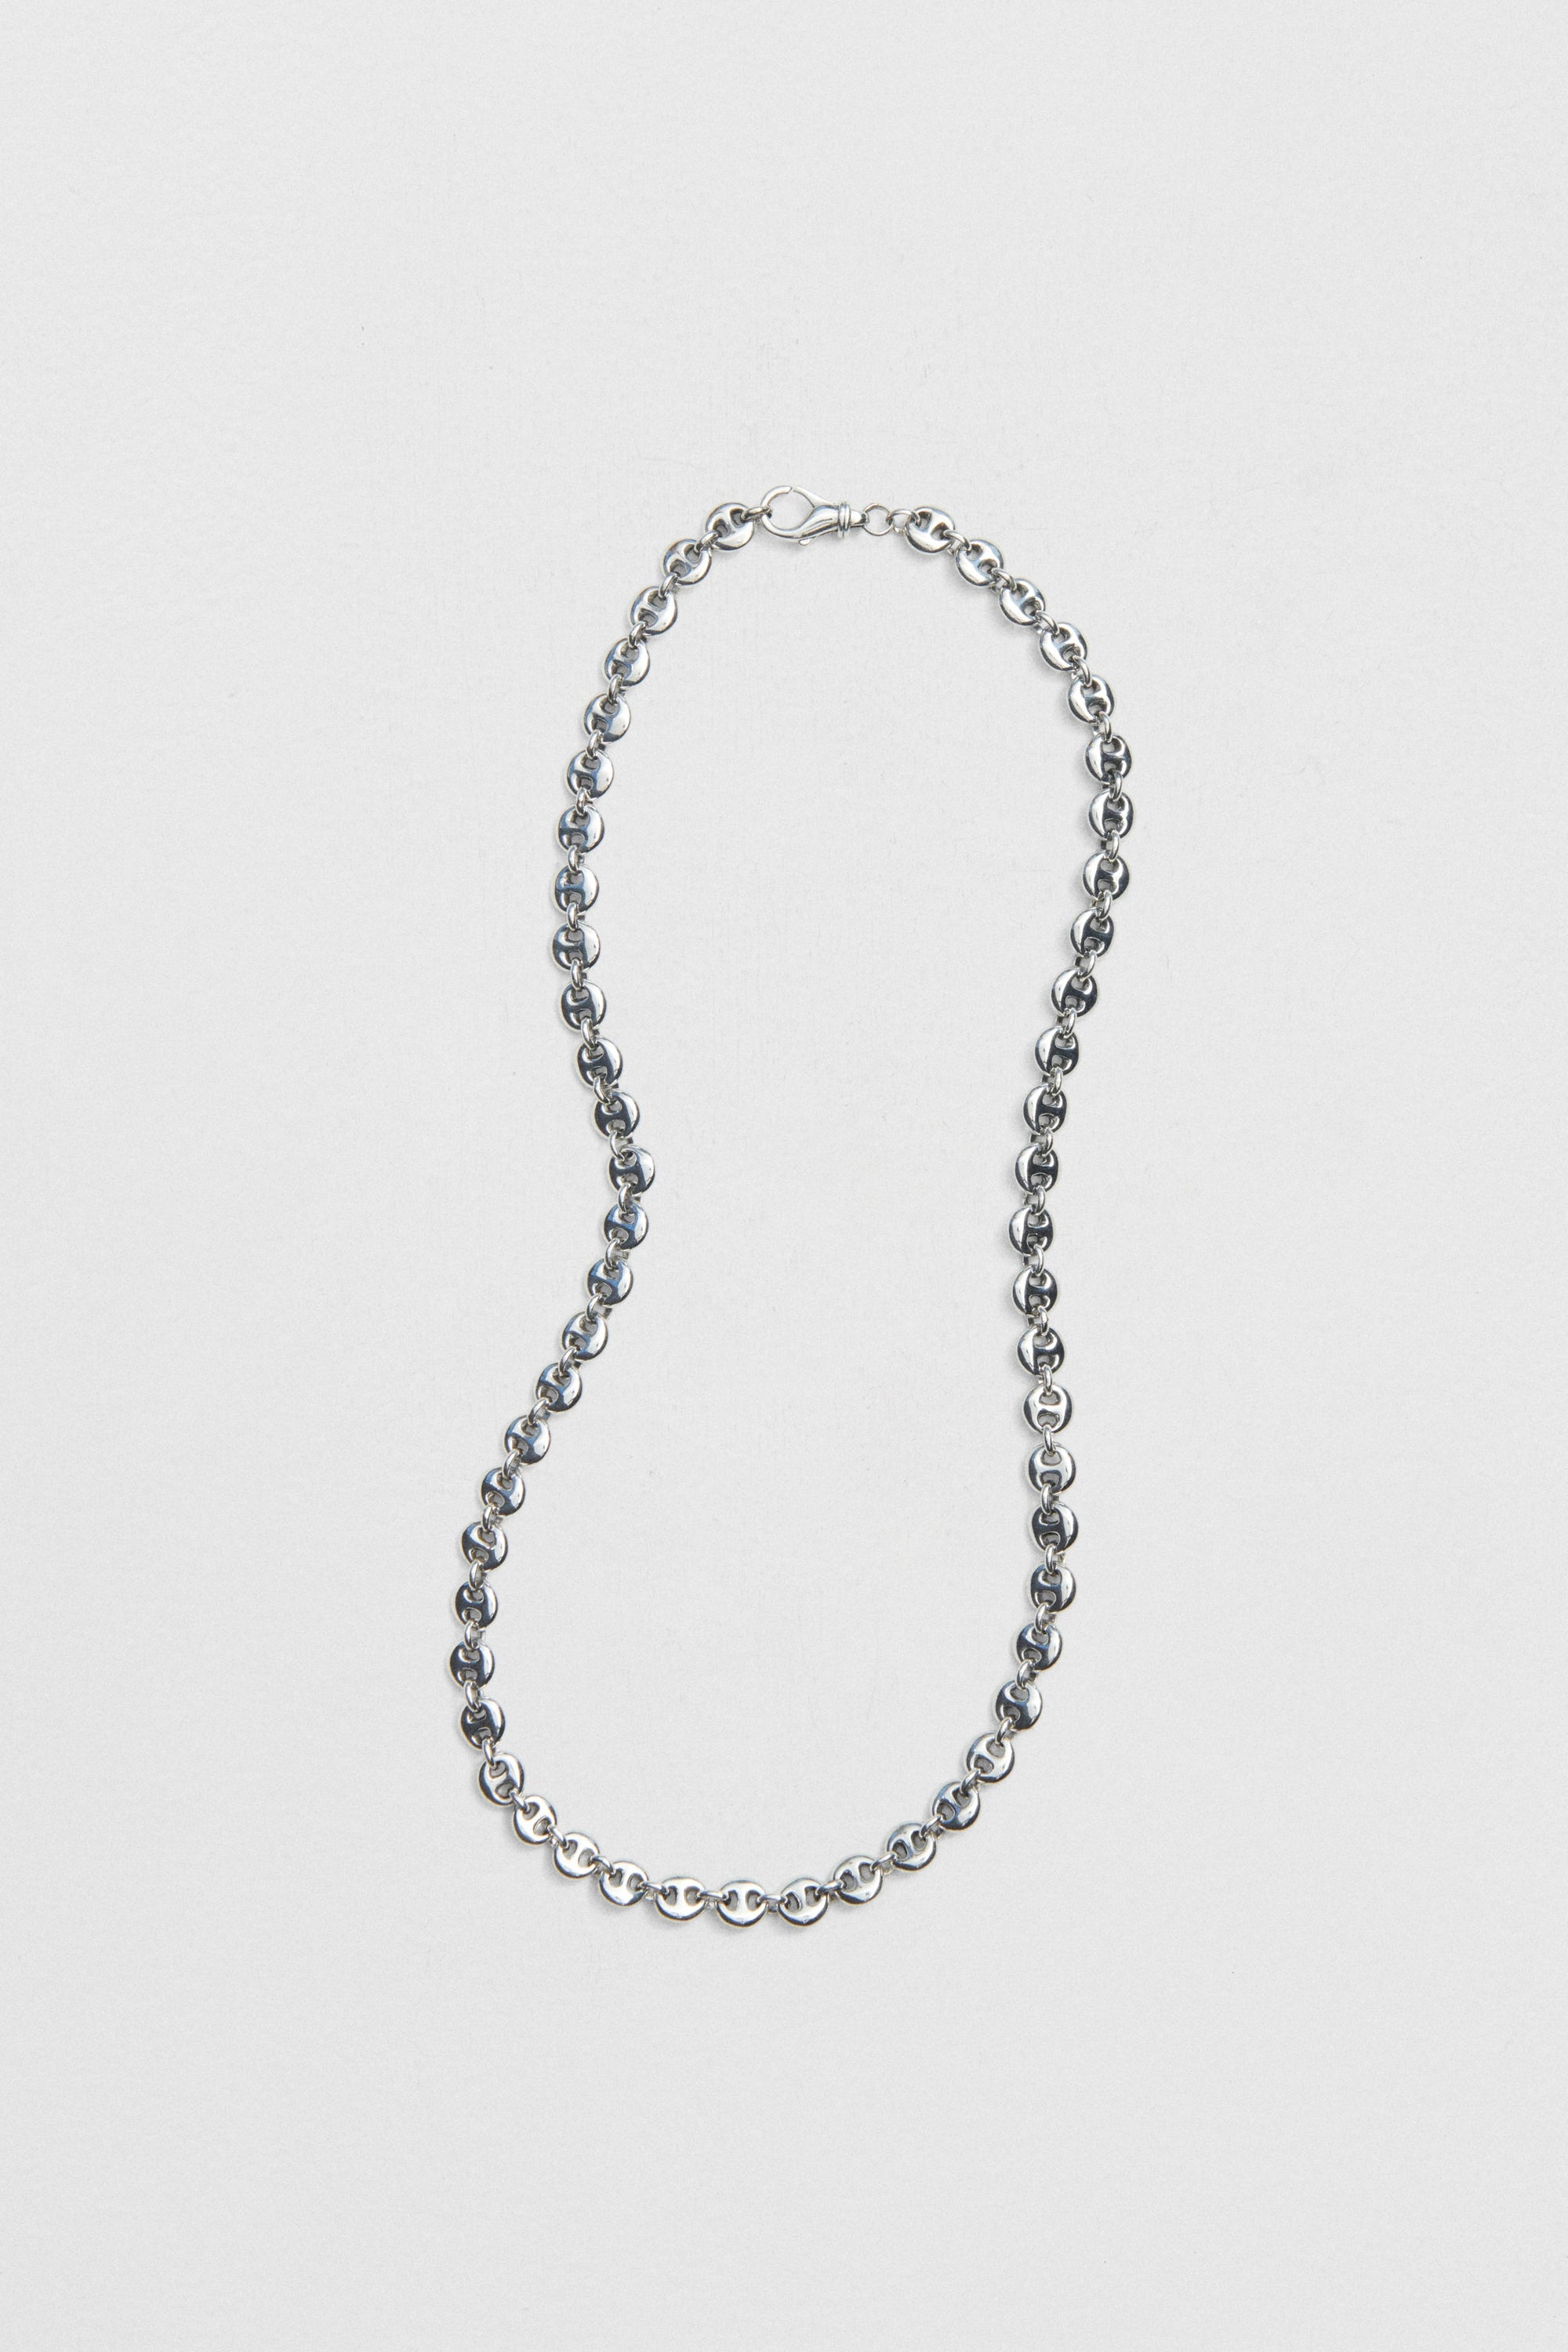 SMALL CIRCLE LINK NECKLACE | MEN'S